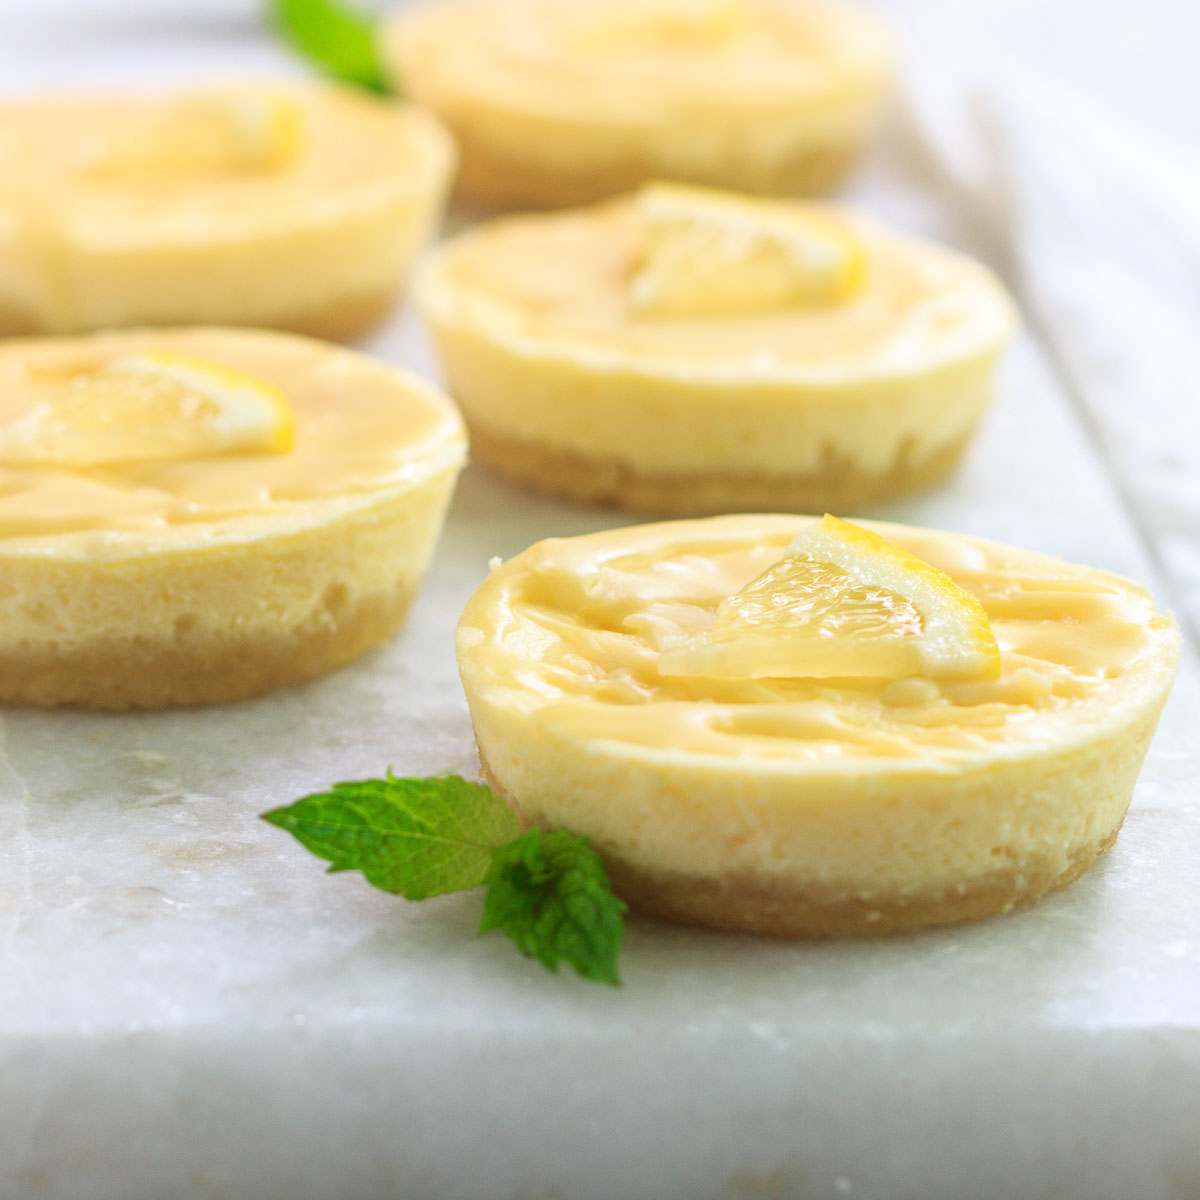 Low carb mini lemon cheesecakes with a white chocolate drizzle on top.